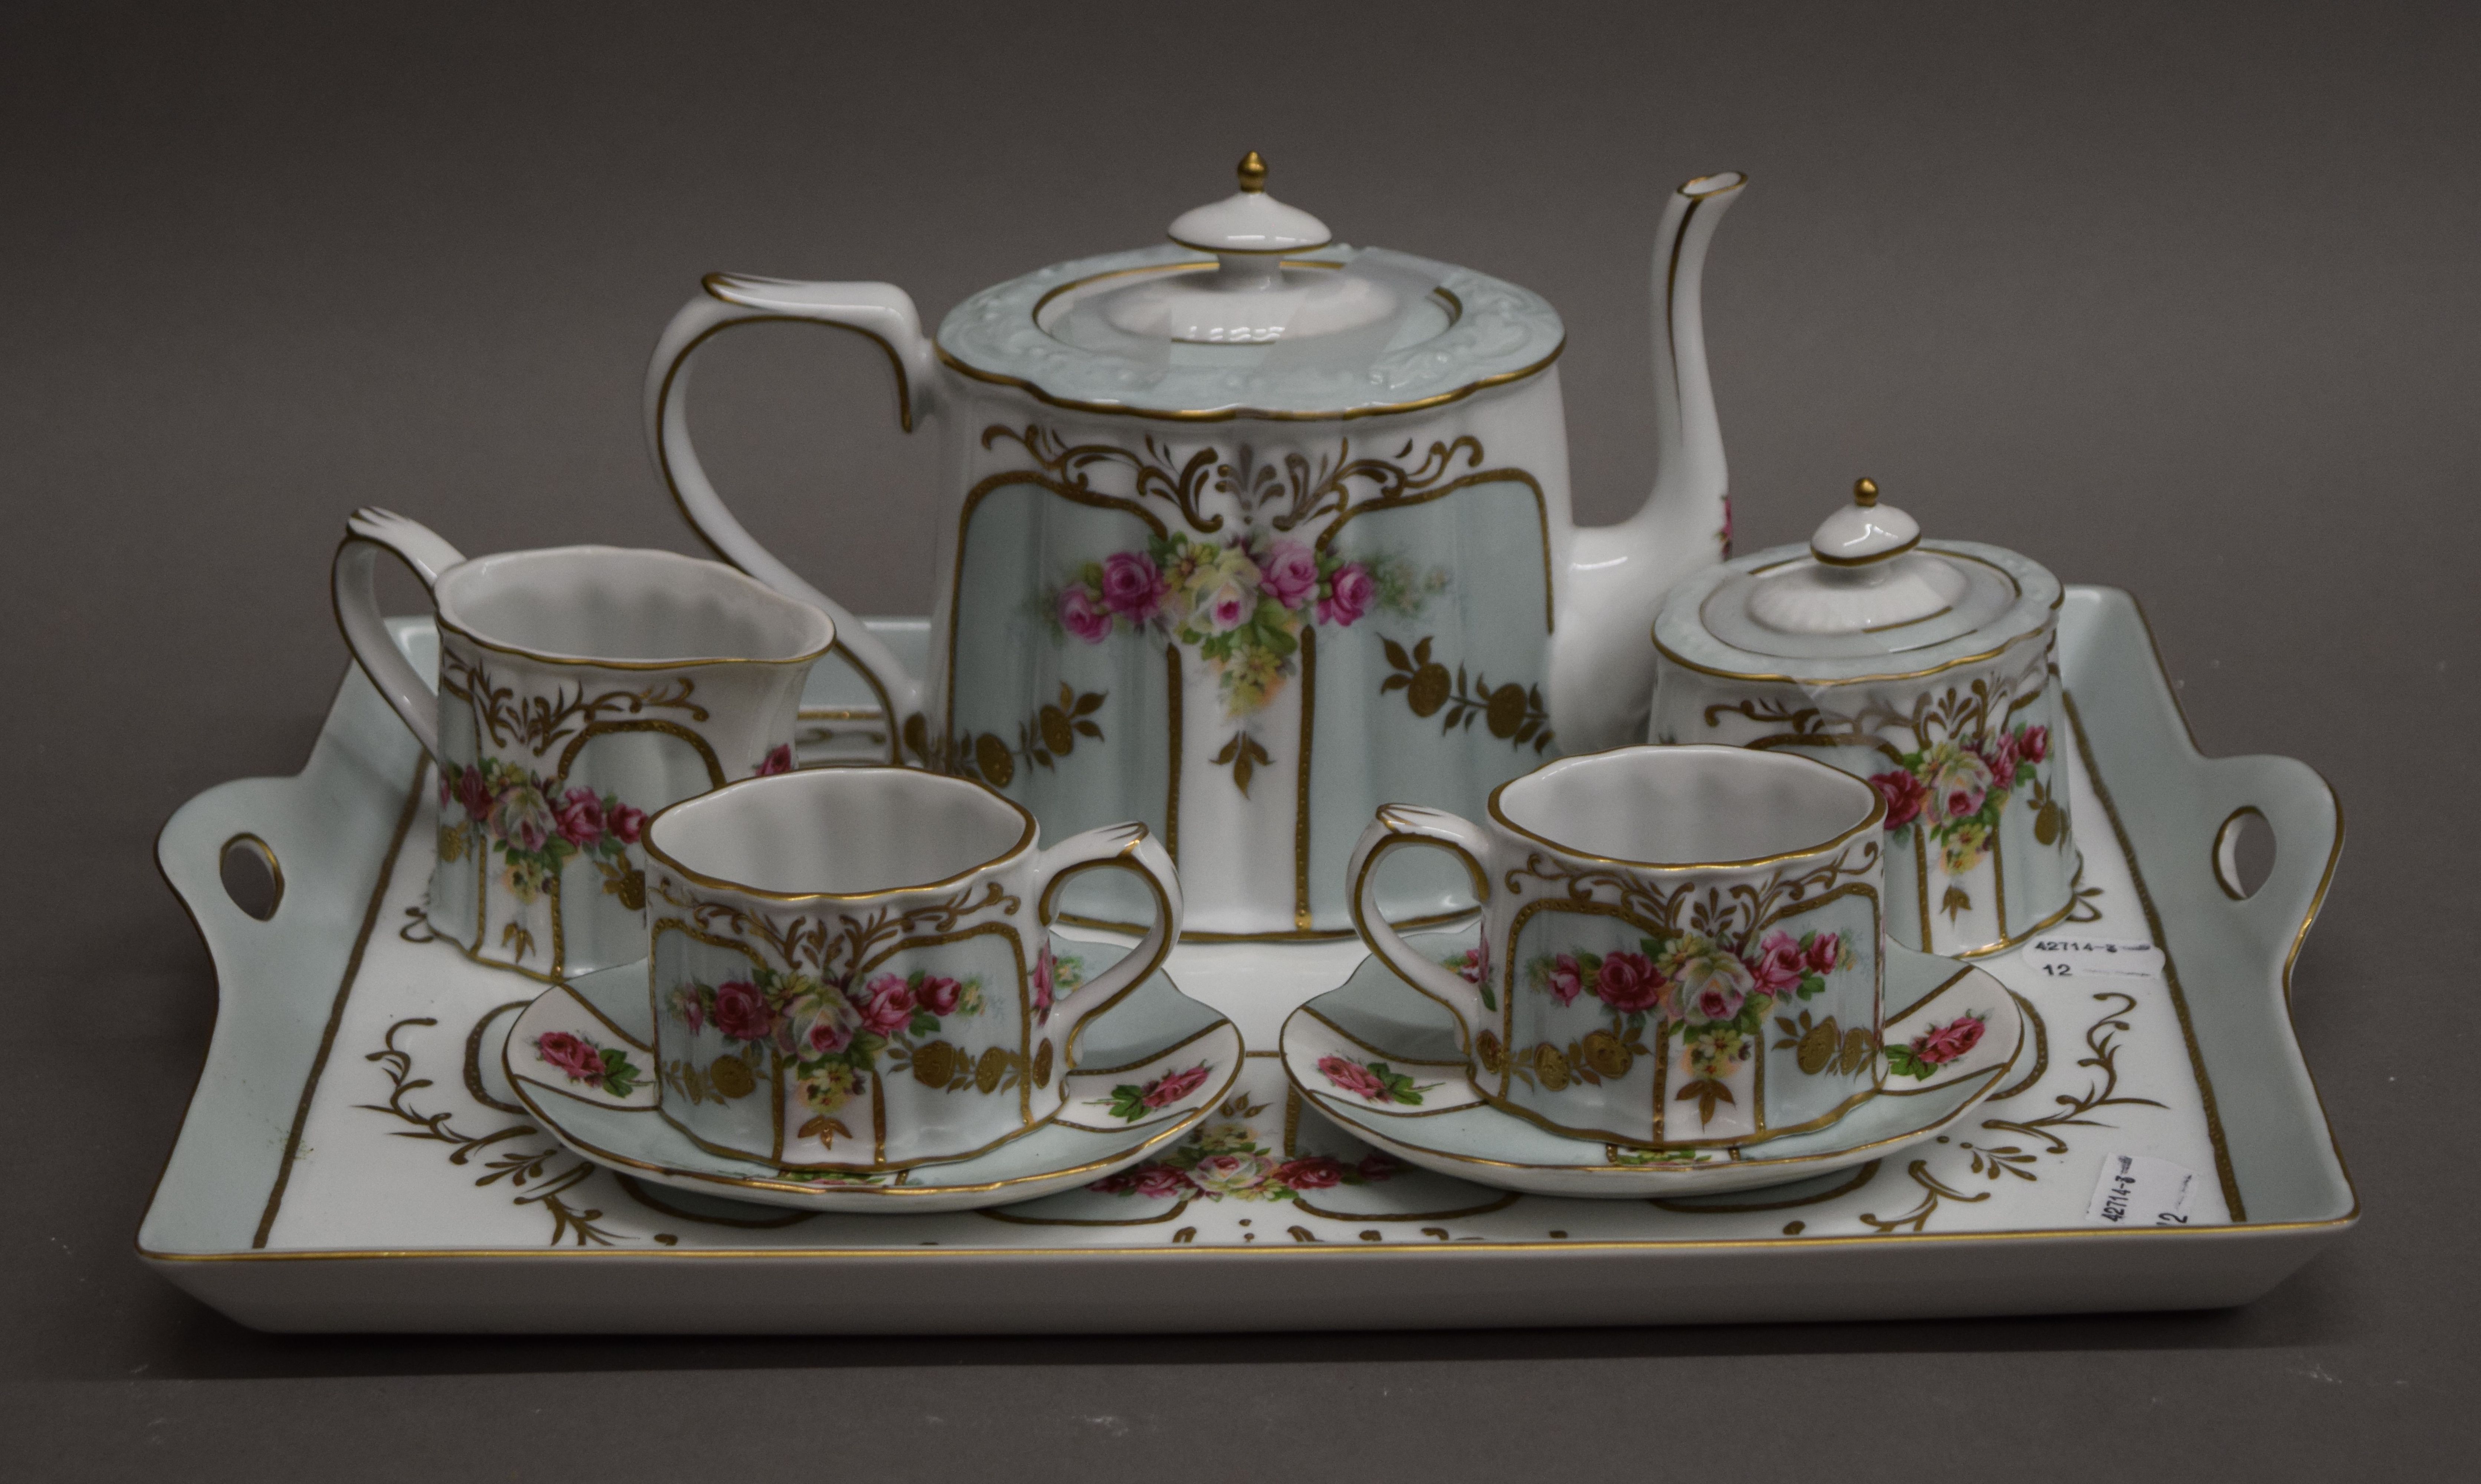 A Meander BV duet tea set on tray. The tray 39 cm long.